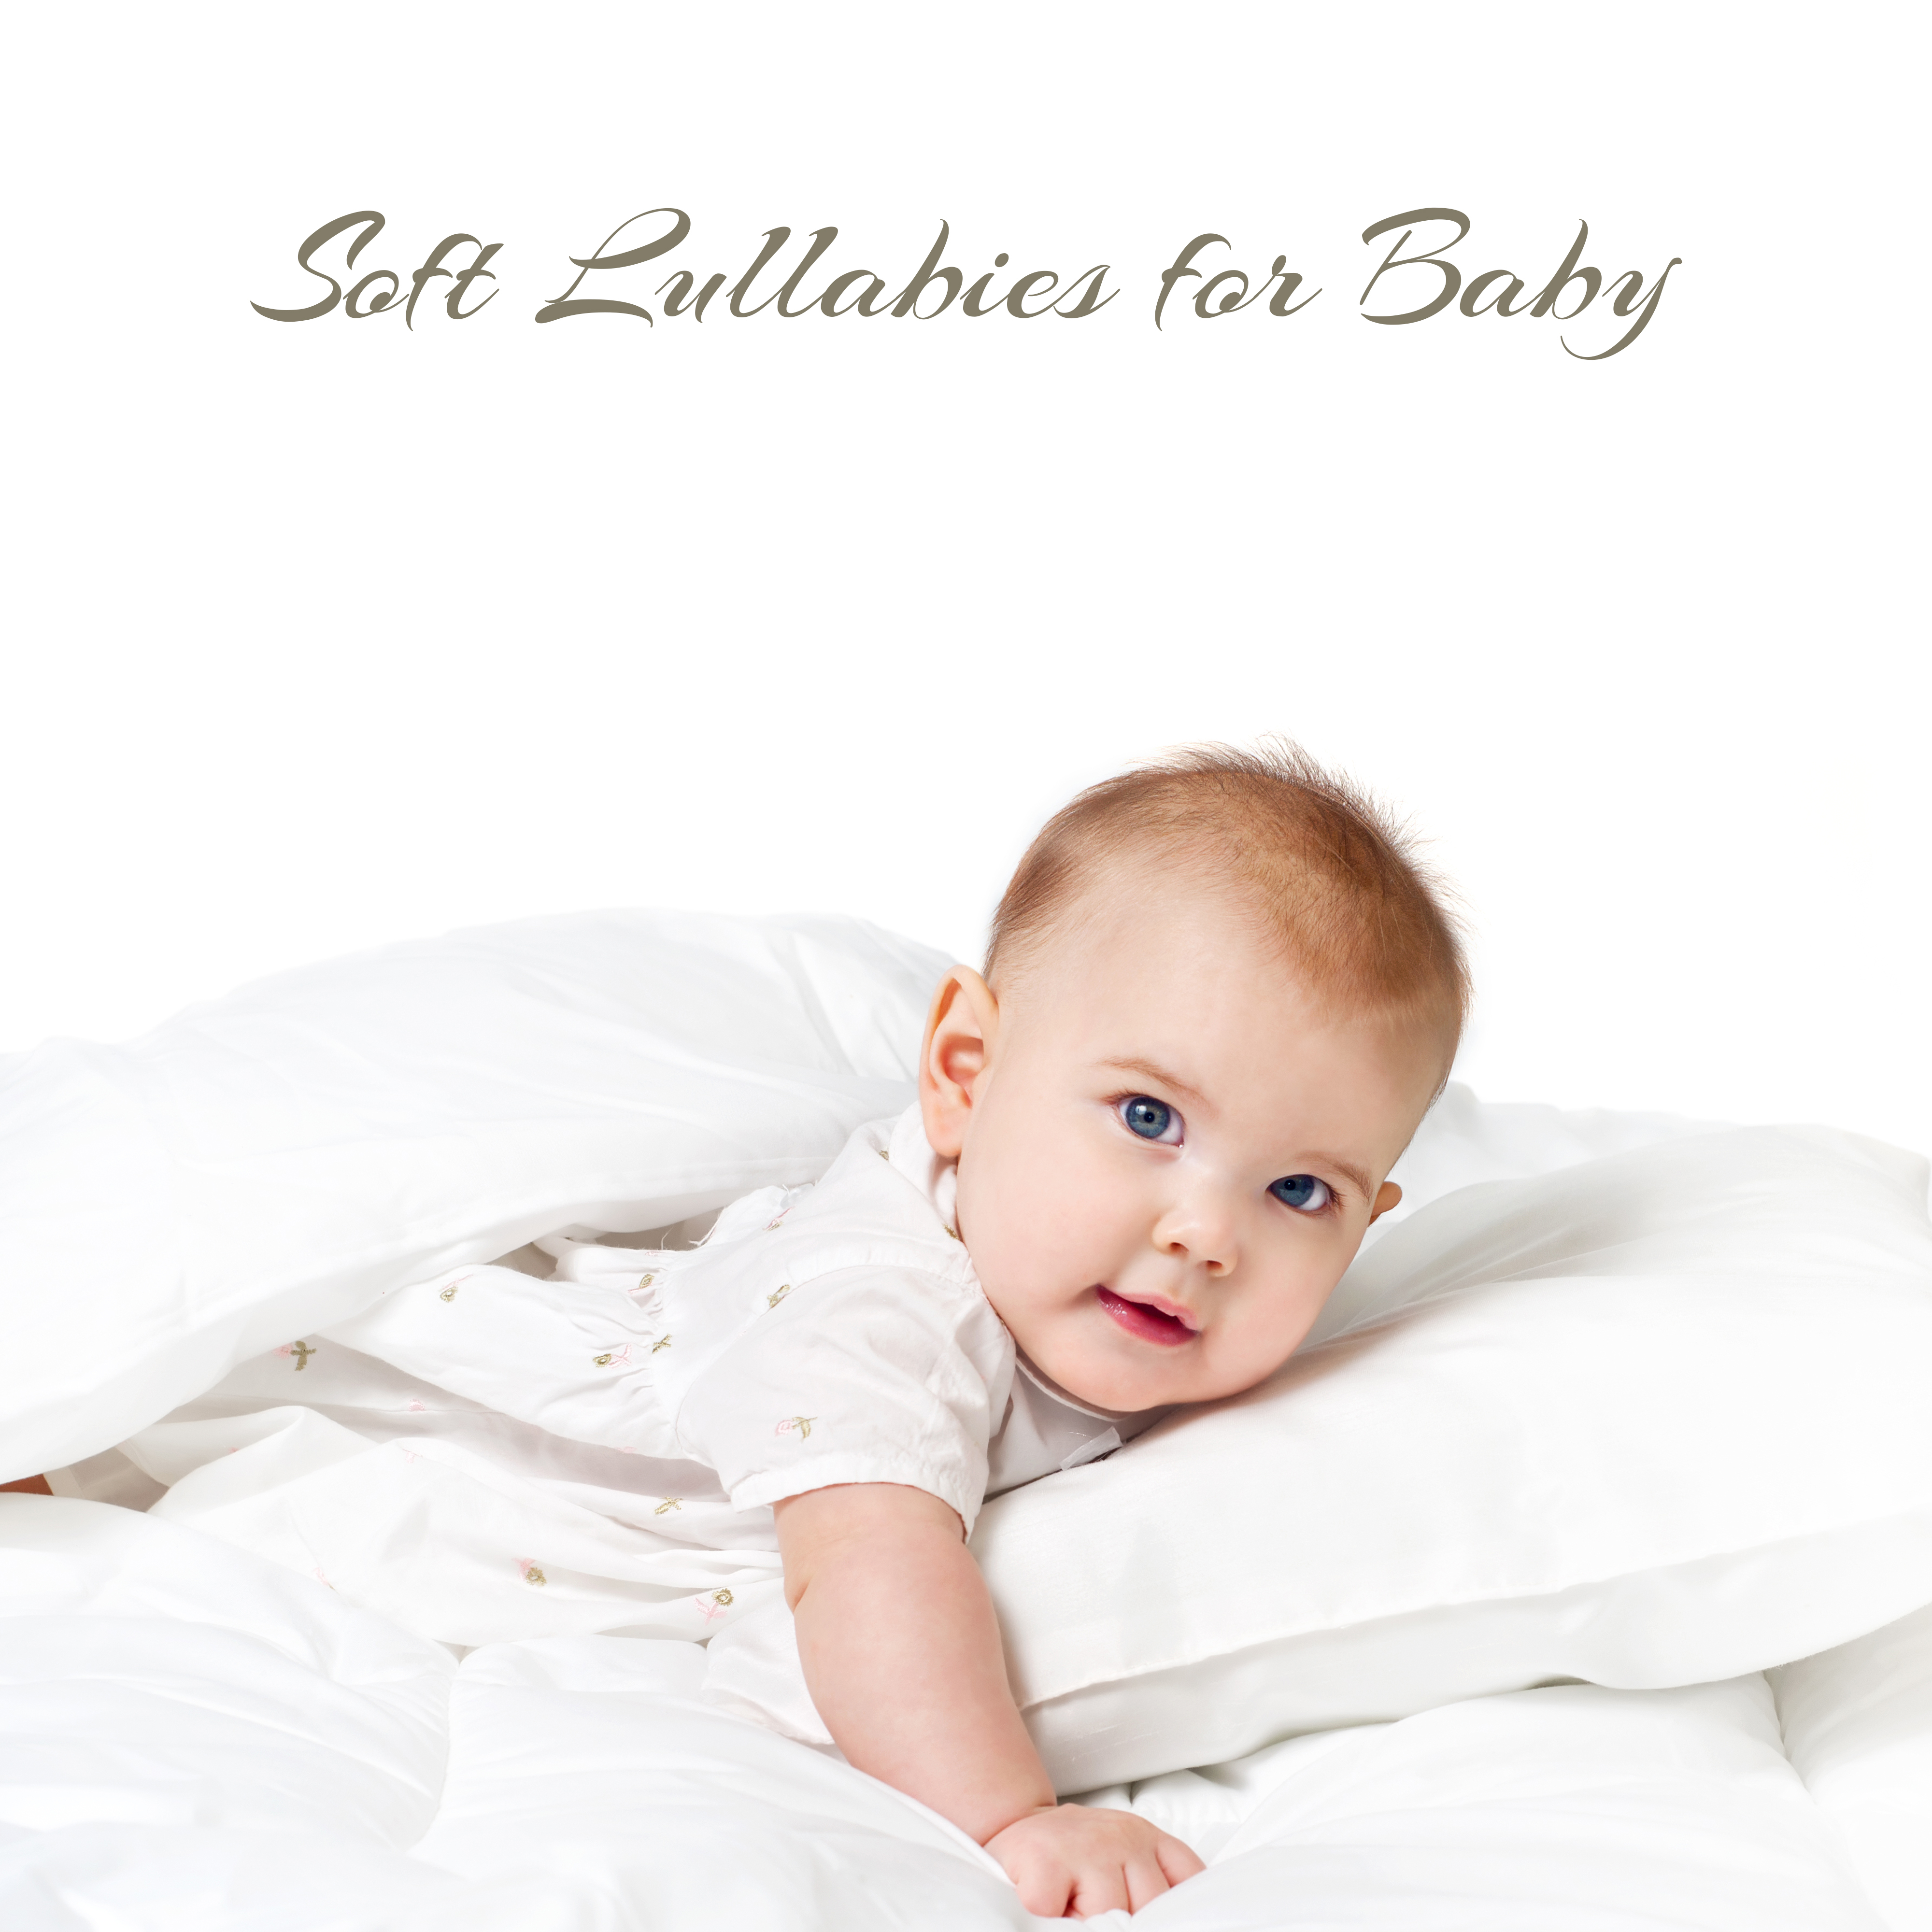 Soft Lullabies for Baby